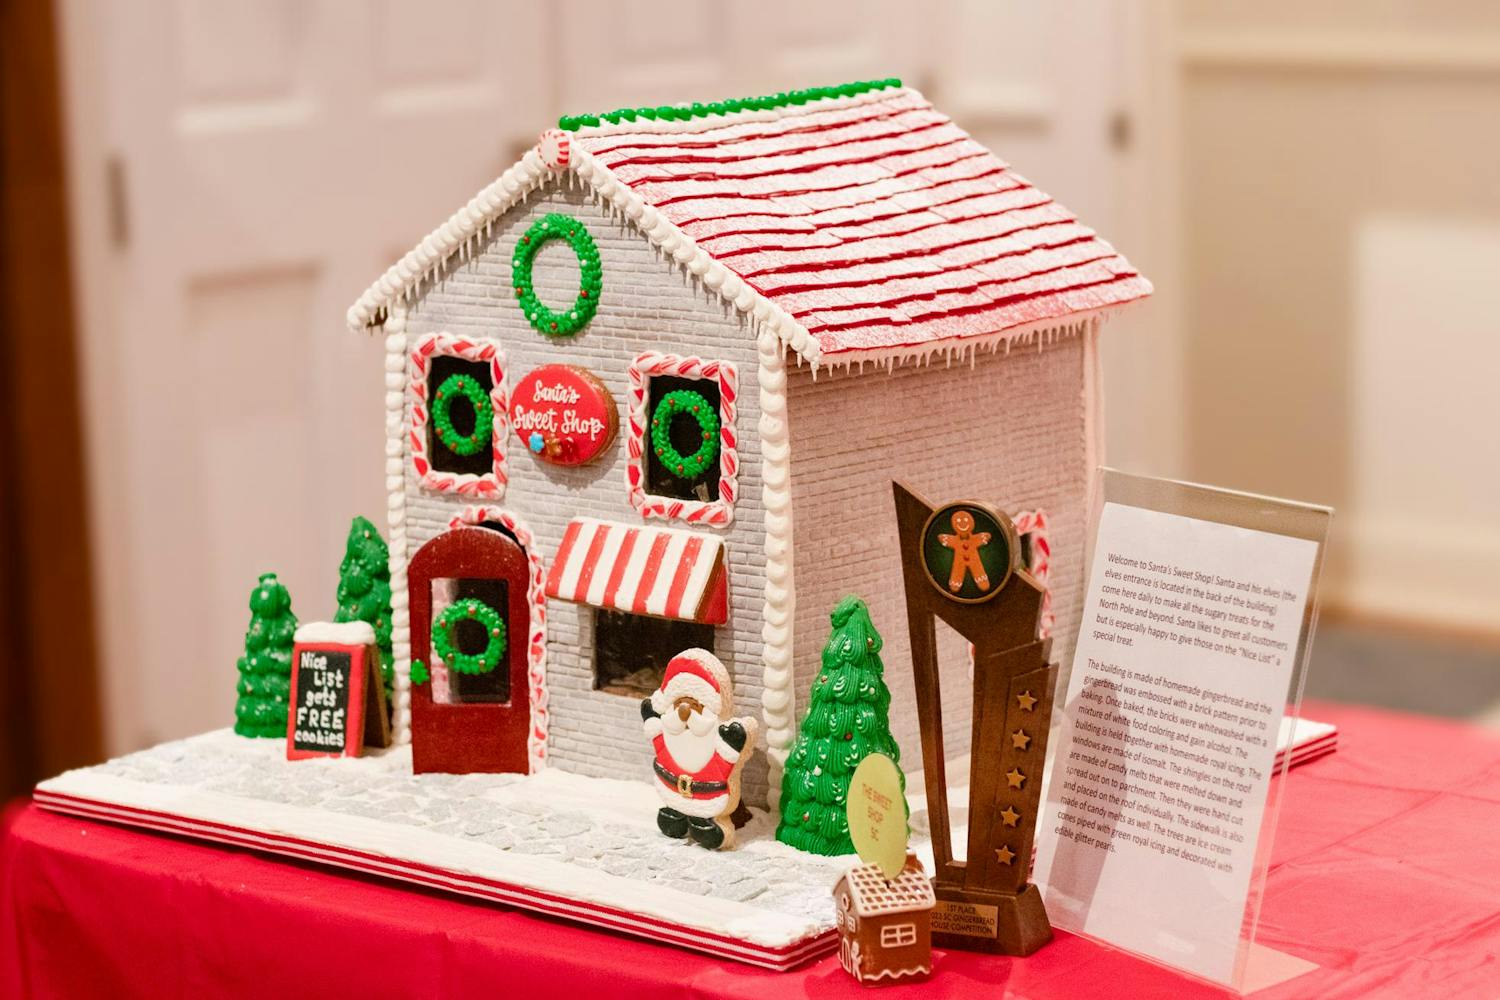 Santa's Sweet Shop won the judge's vote for first annual Gingerbread Contest and Exhibition presented by NoMa Warehouse and Davis Architecture. Seed Architecture was awarded second place as well as People’s Choice winner in the Gingerbread contest.